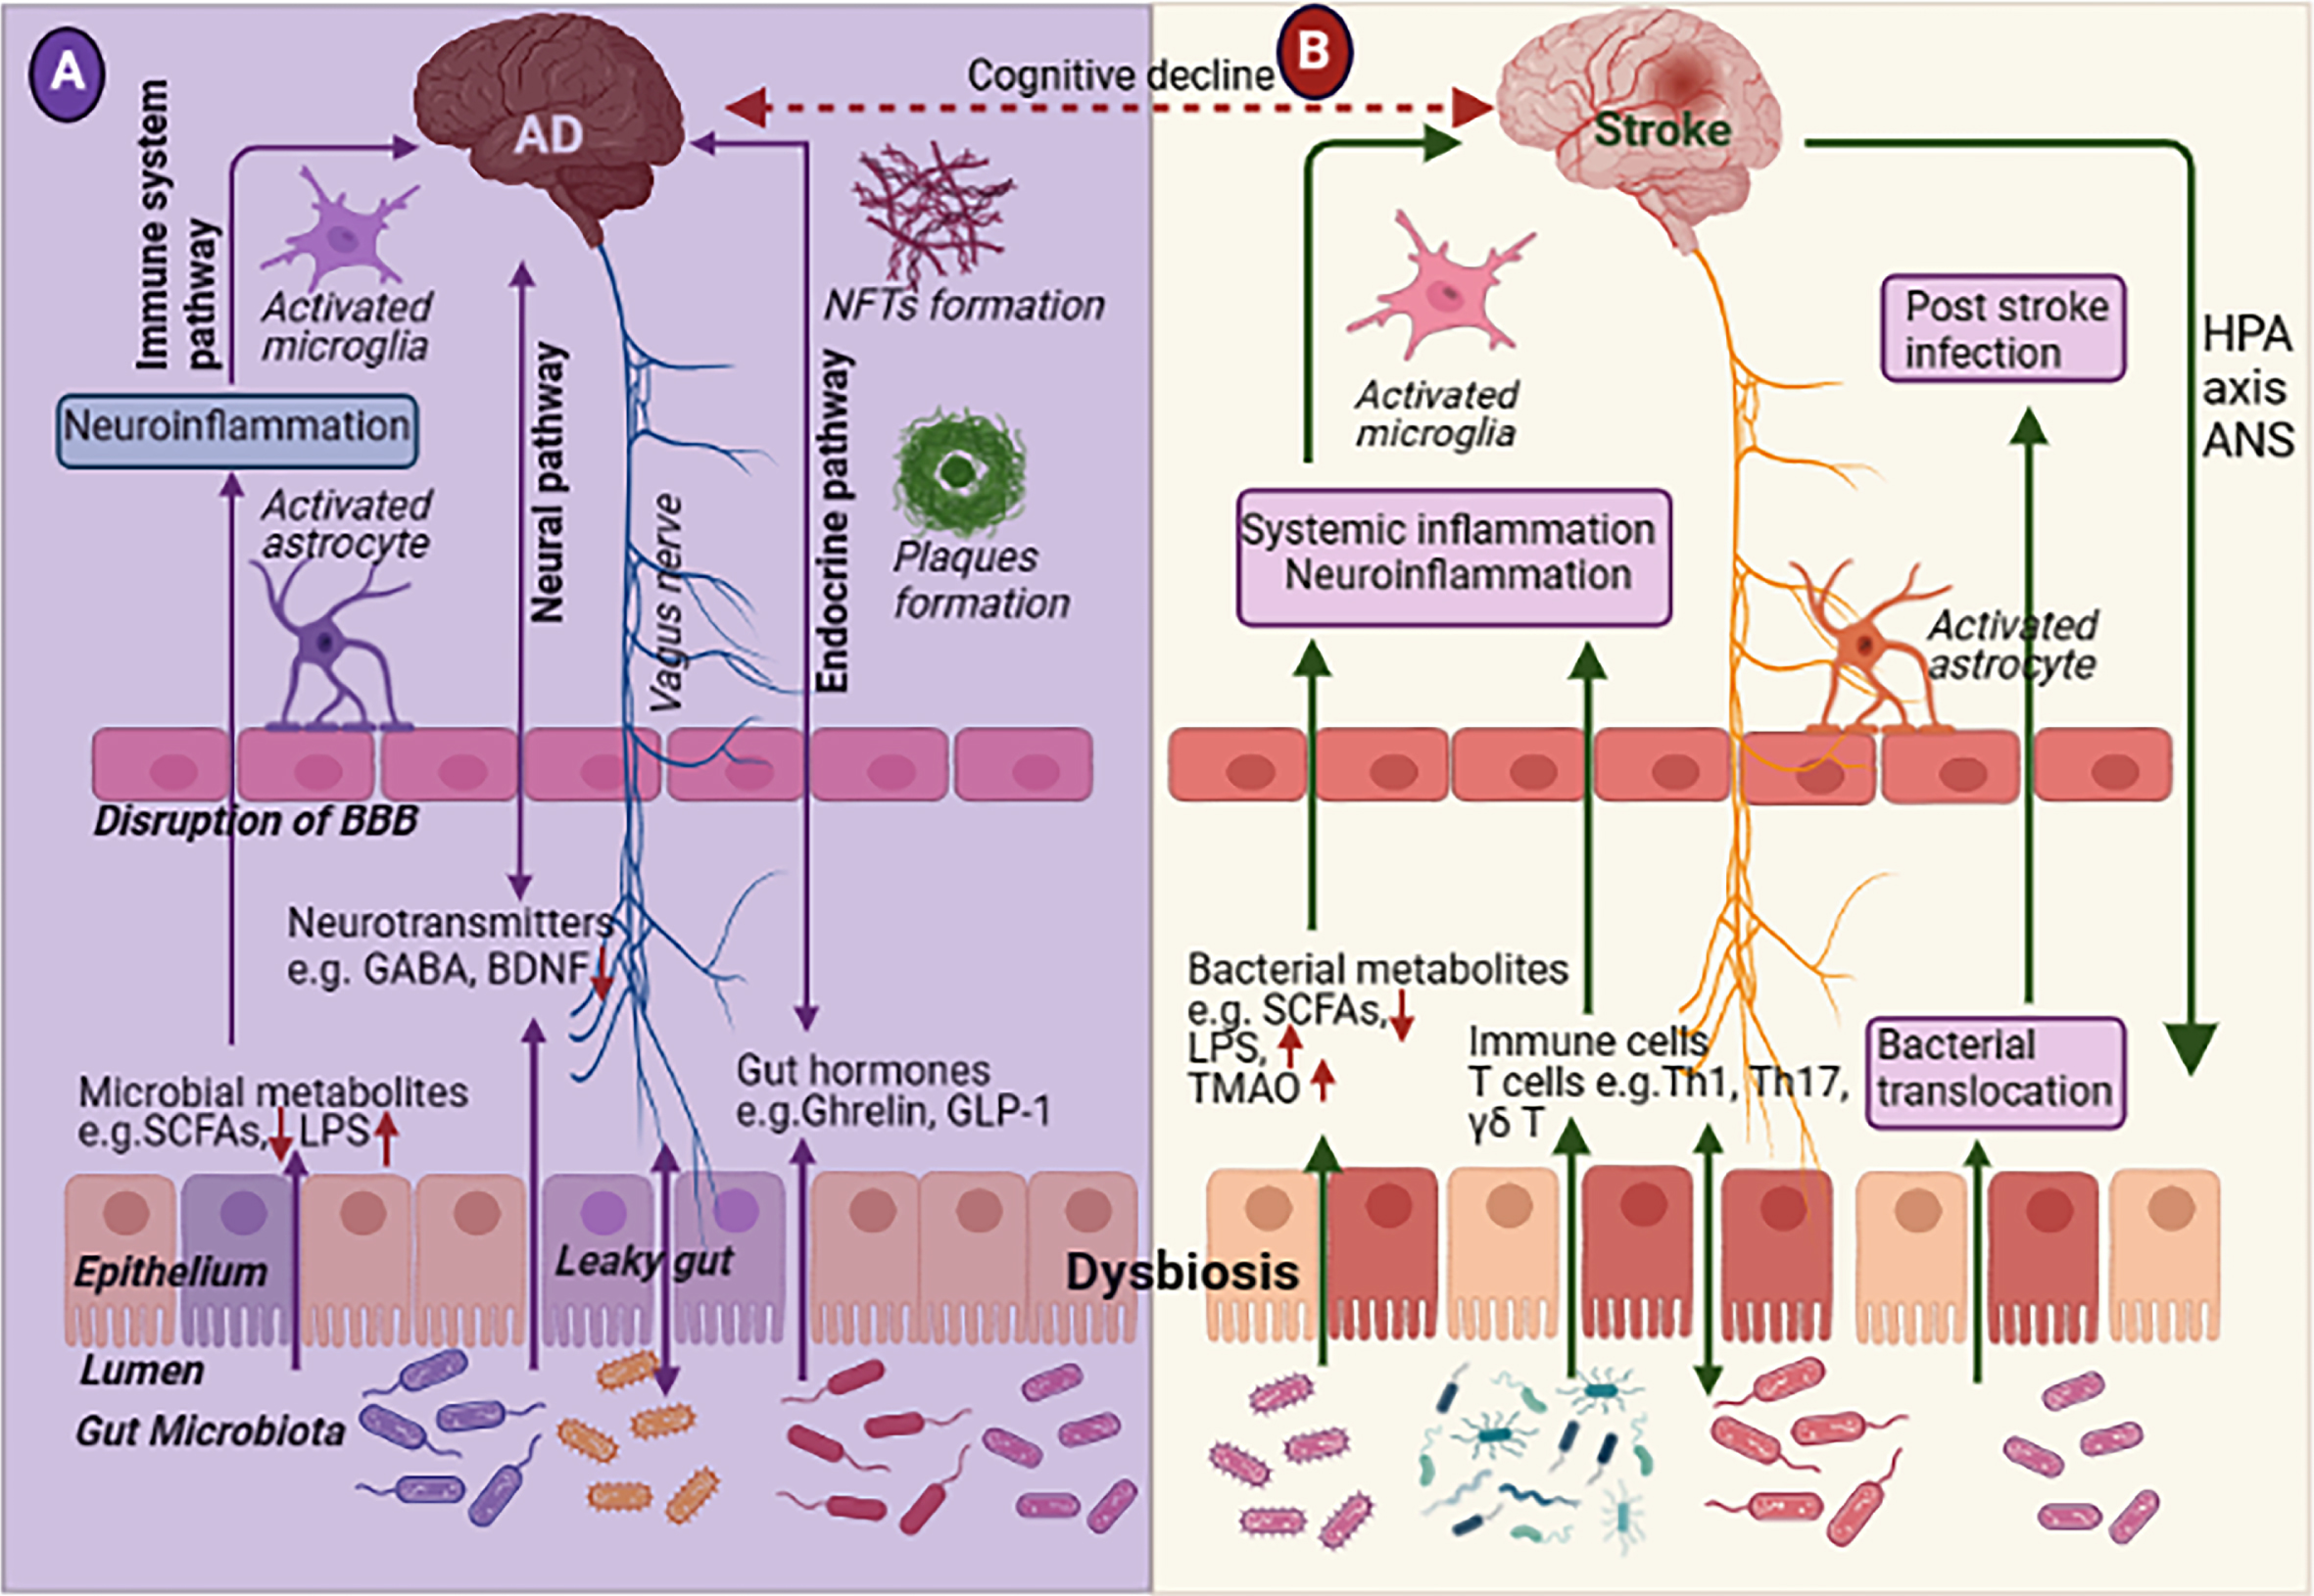 Schematic representation of microbiome-gut-brain axis in (A) Alzheimer’s disease (AD) and (B) stroke. The bidirectional gut-brain interaction communicates by mainly four pathways such as metabolic, immune, neural and endocrine signaling pathways. Gut dysbiosis changes gut-microbiota diversity and gut microbiota enter to blood circulation by leaky gut in both AD and stroke. In addition, the ischemic brain triggers the gut-microbiota diversity by the hypothalamic-pituitary-adrenal (HPA) pathway which plays an important role in stroke outcomes. BBB, blood-brain barrier; BDNF, brain derived neurotrophic factor; GABA, gamma-aminobutyric acid; GLP-1, glucagon-like peptide 1; HPA, hypothalamus-pituitary-adrenal; LPS, lipopolysaccharide; NFTs, neurofibrillary tangles; SCFAs, short-chain fatty acids; TMAO, trimethylamine N-oxide.